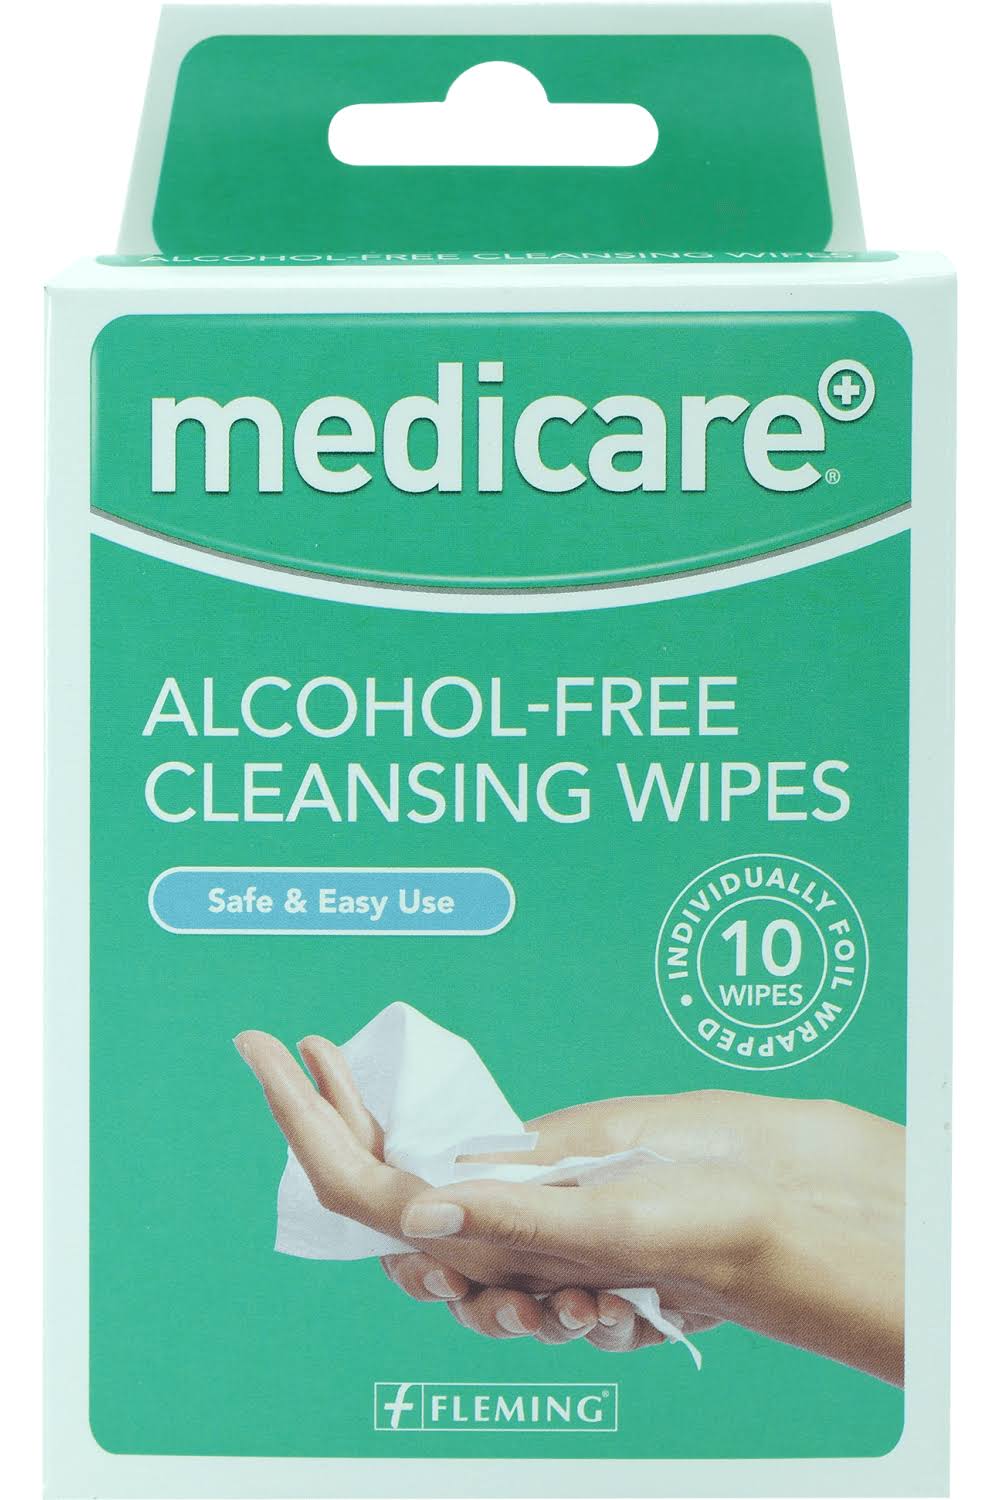 Medicare 10 Alcohol-Free Cleansing Wipes